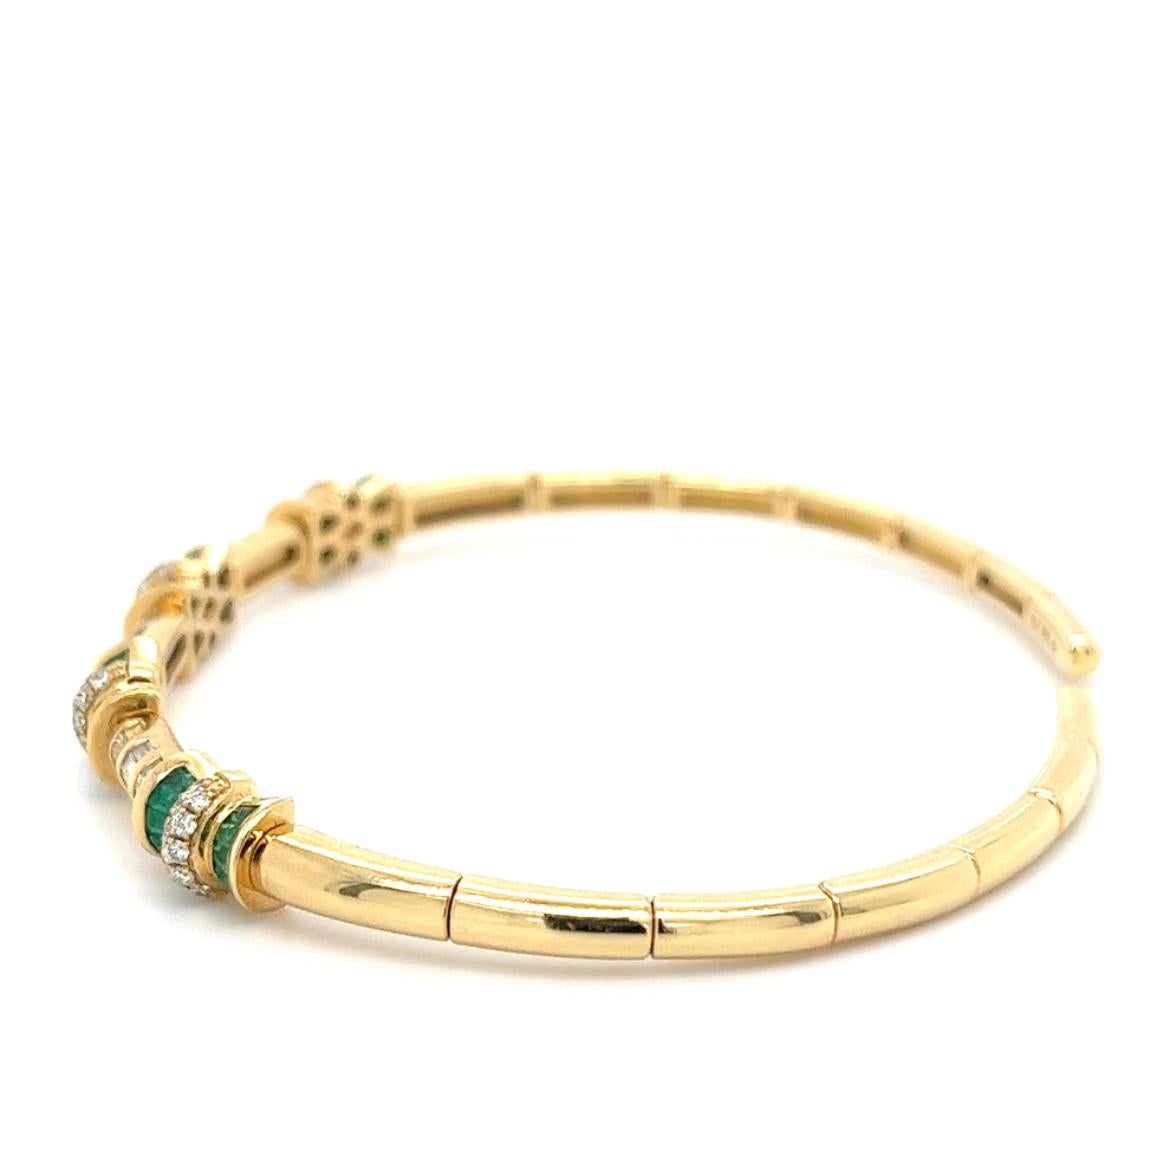 18K Yellow Gold Emerald Bracelets with Diamonds

18K Yellow Gold - 10.35 GM
36 Diamonds - 0.59 CT
40 Emeralds - 2.68 CT
44 Diamonds - 0.29 CT

These exquisite bracelets are crafted from premium 18K yellow gold, exuding an elegant and opulent look.